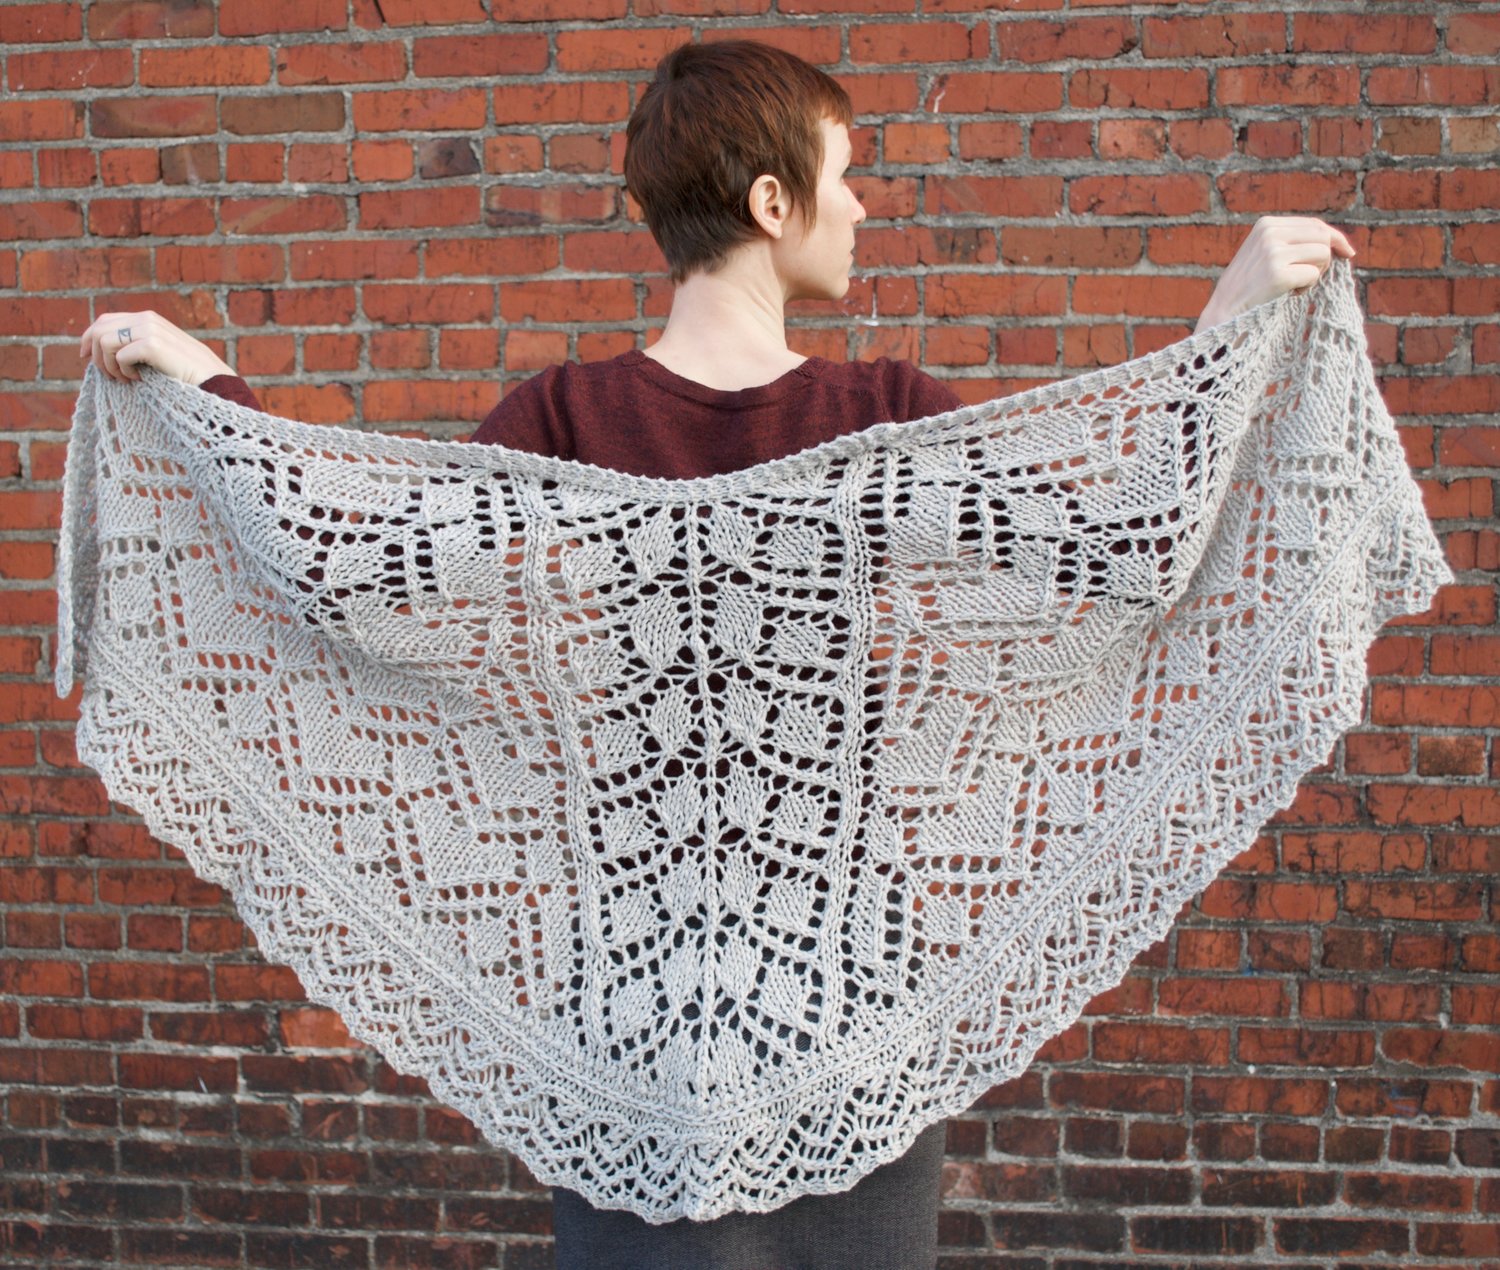 Yarnspirations - Basking in the warm glow of this gorgeous shawl 🌞 This  beautiful Antivirus 2020 Shawl pattern is knitted in Red Heart Unforgettable  in Sunrise and designed by @kw_knits. Find more